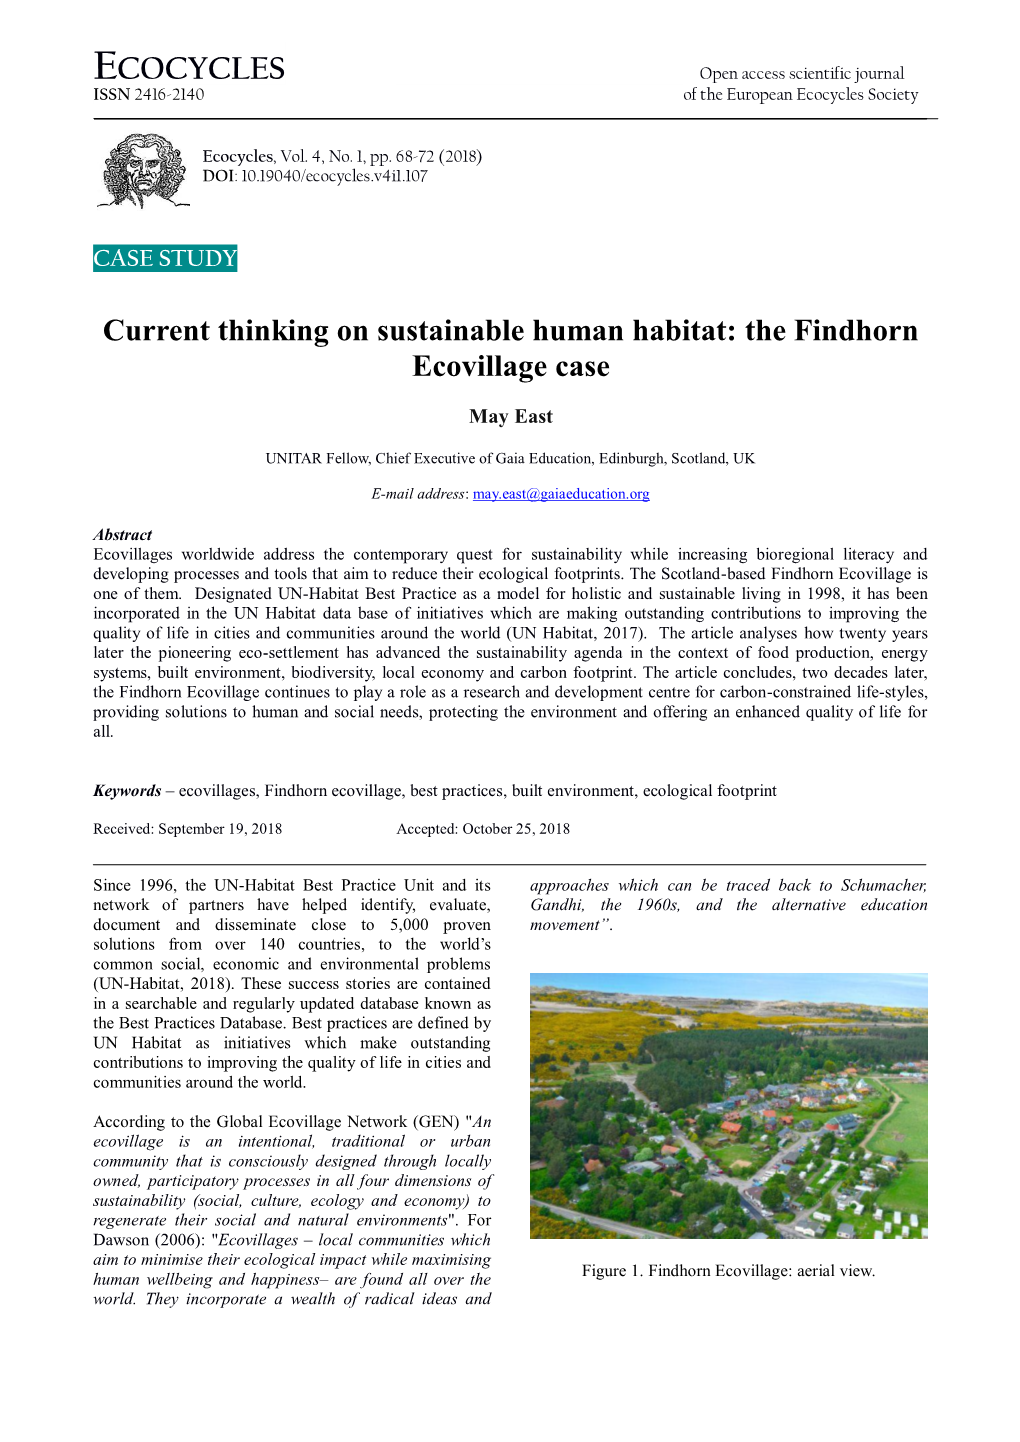 The Findhorn Ecovillage Case